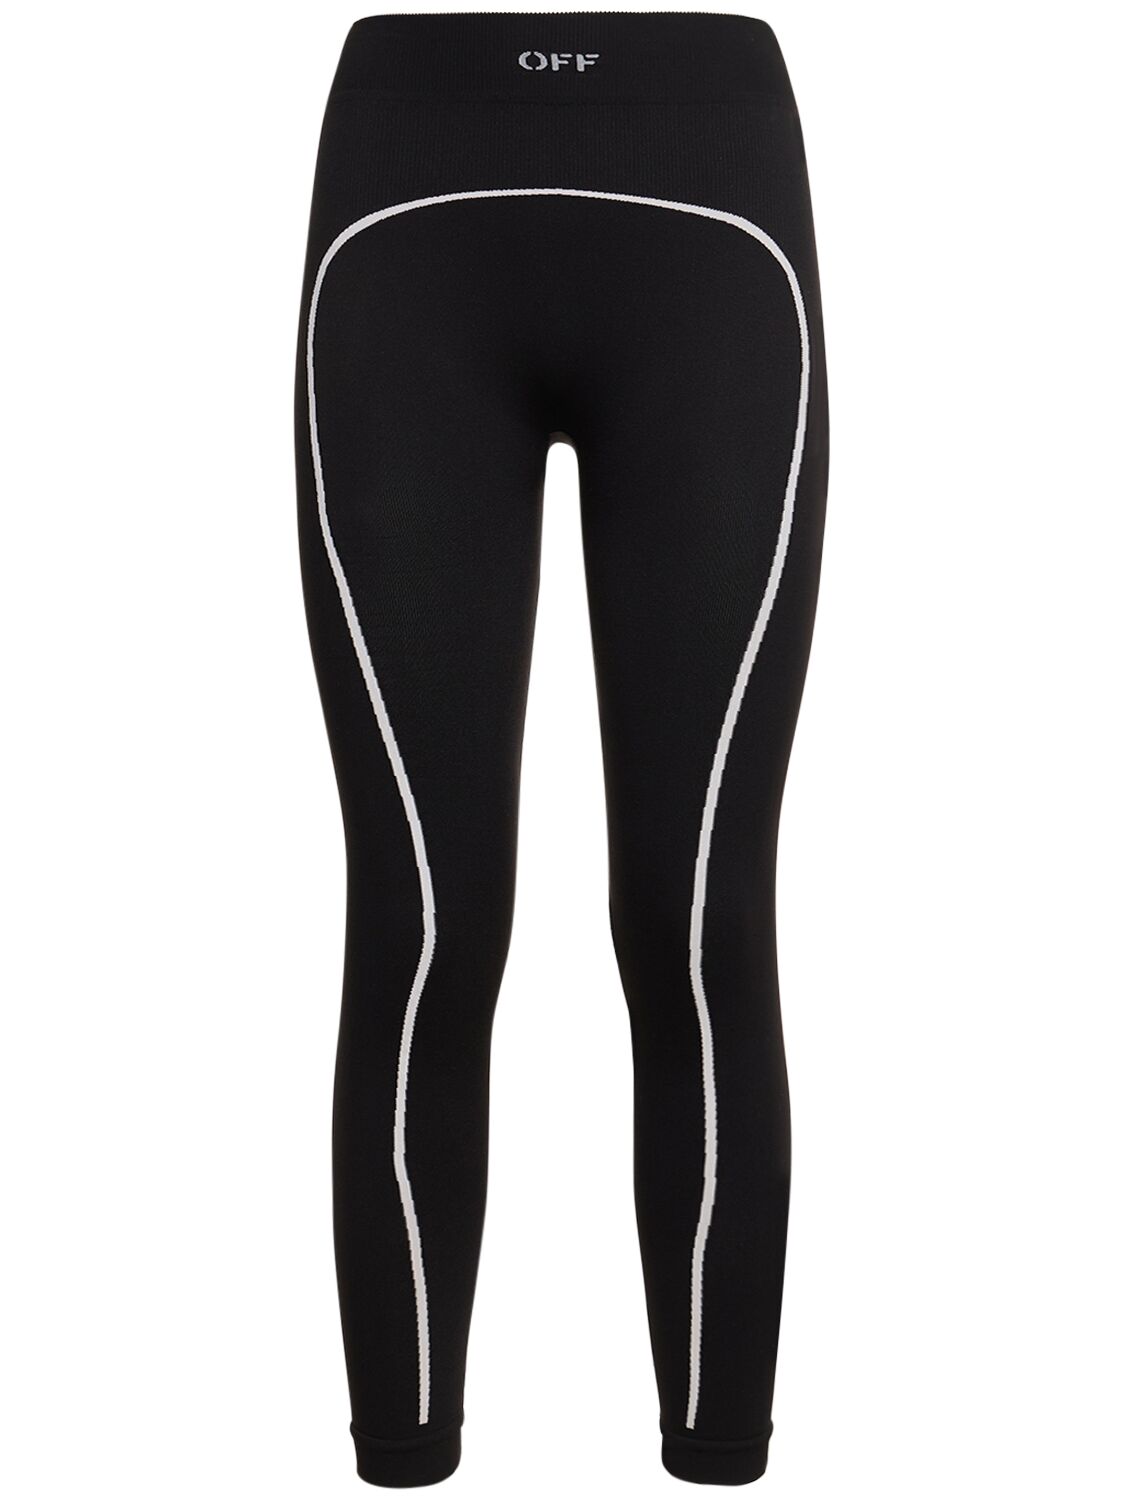 Image of Off Stamp Stretch Tech Leggings